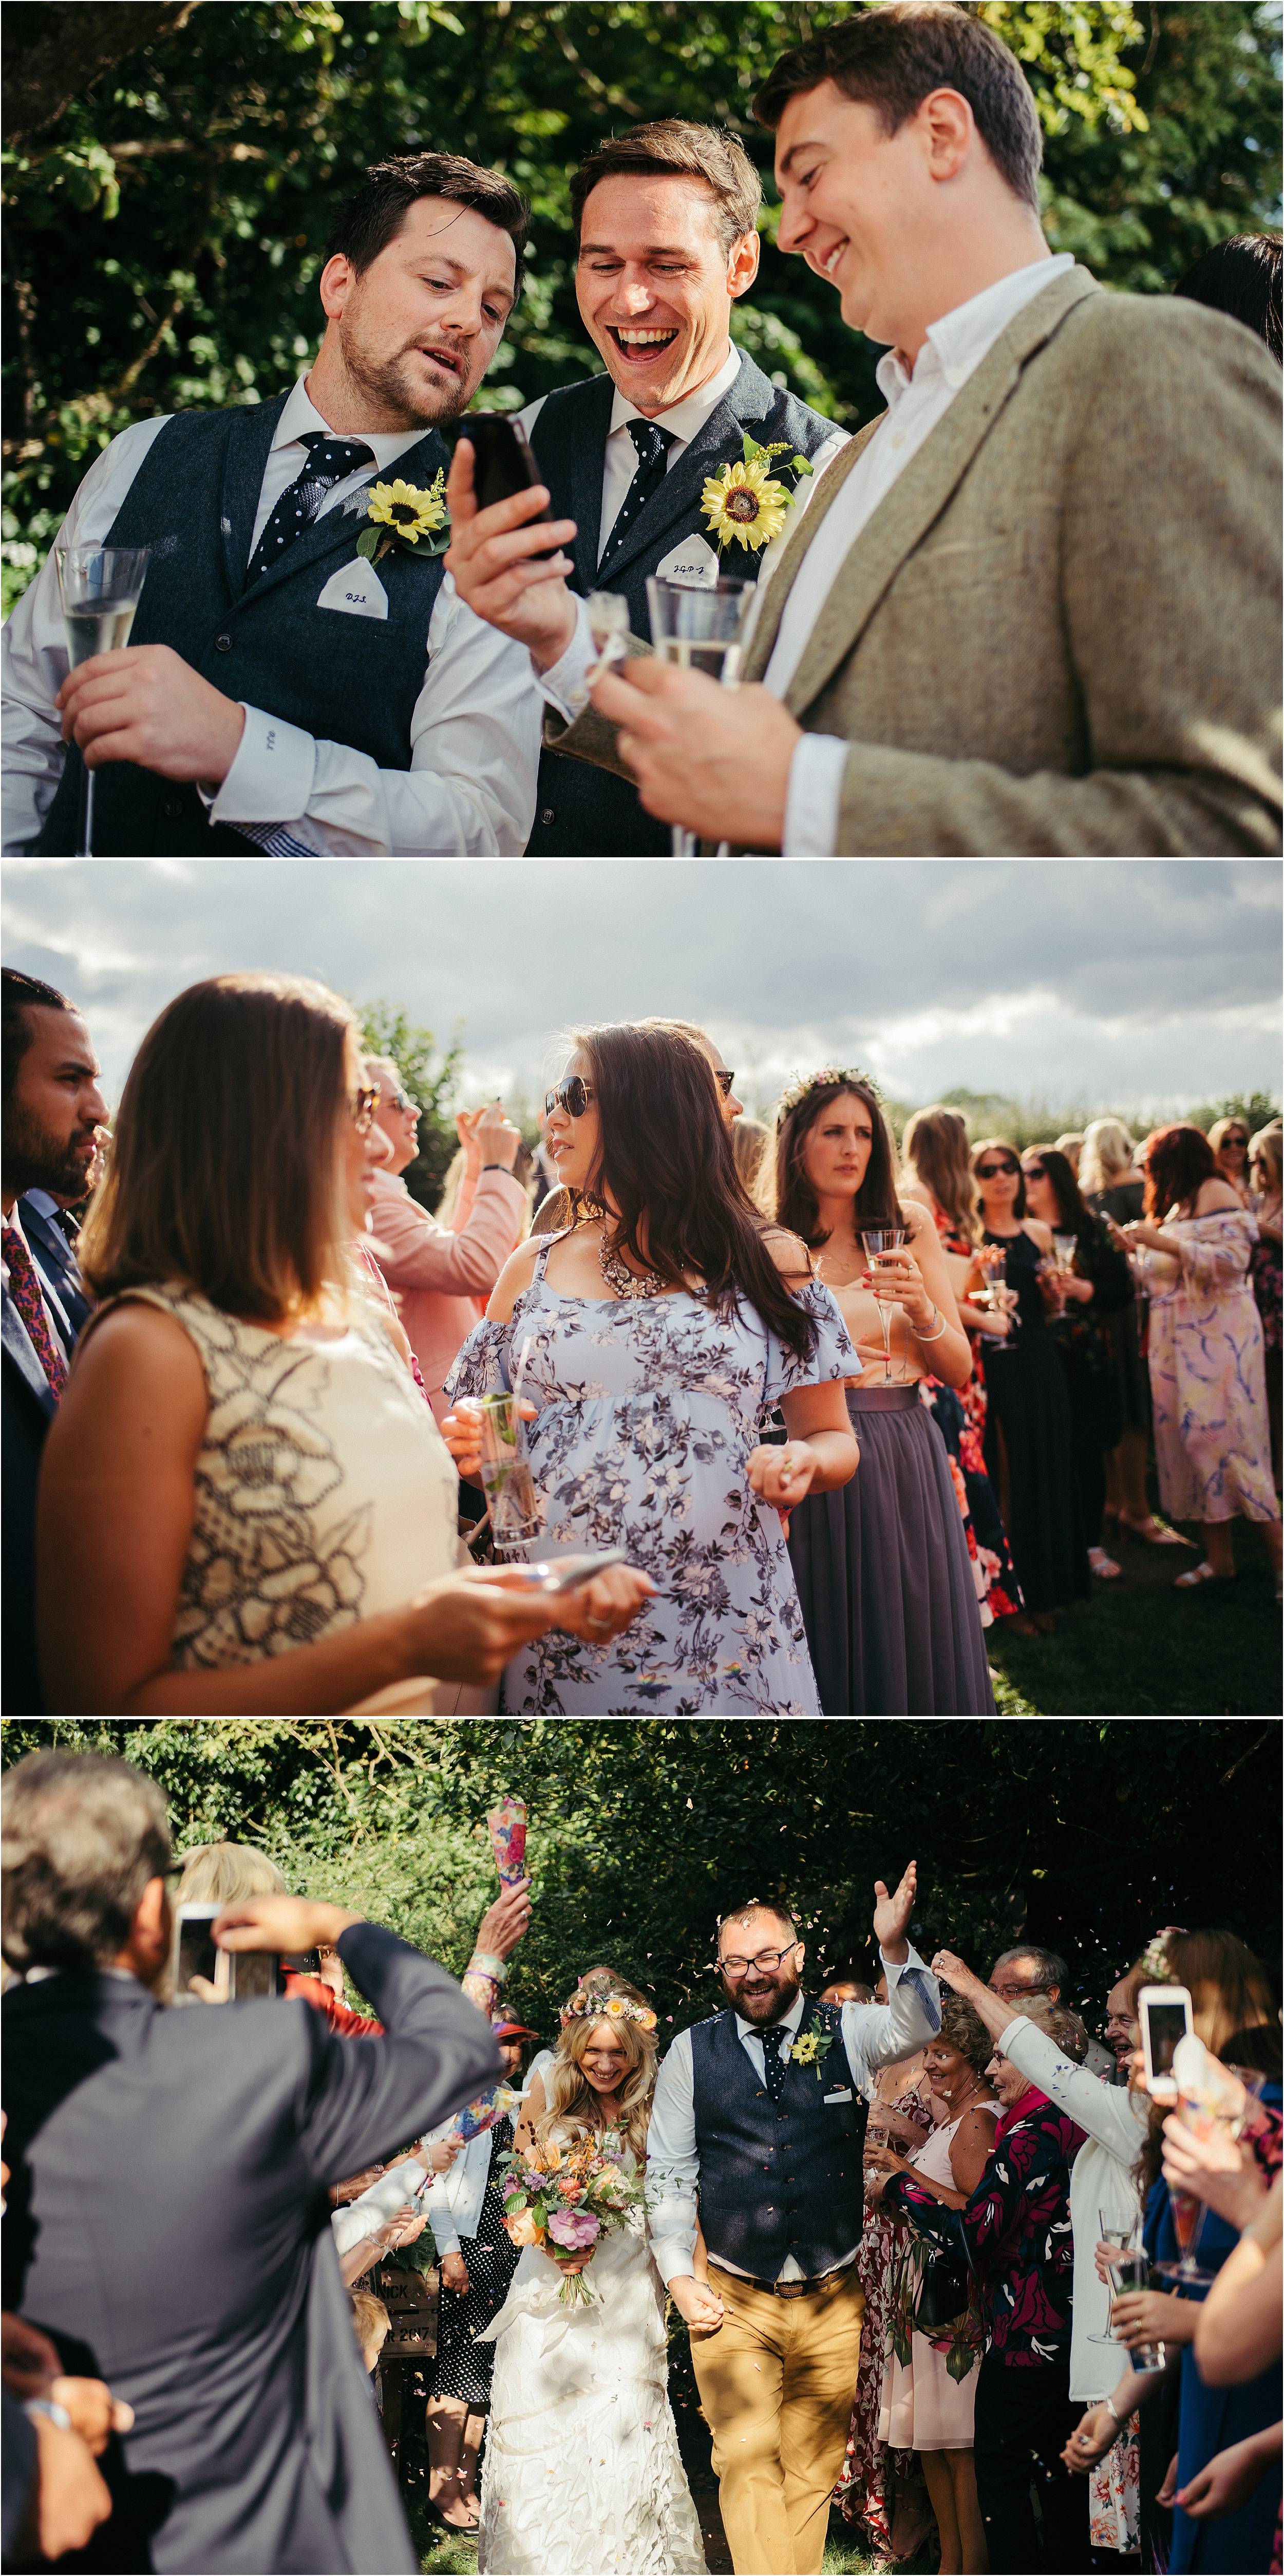 The Crooked Billet Pub Oxfordshire Wedding Photography_0060.jpg